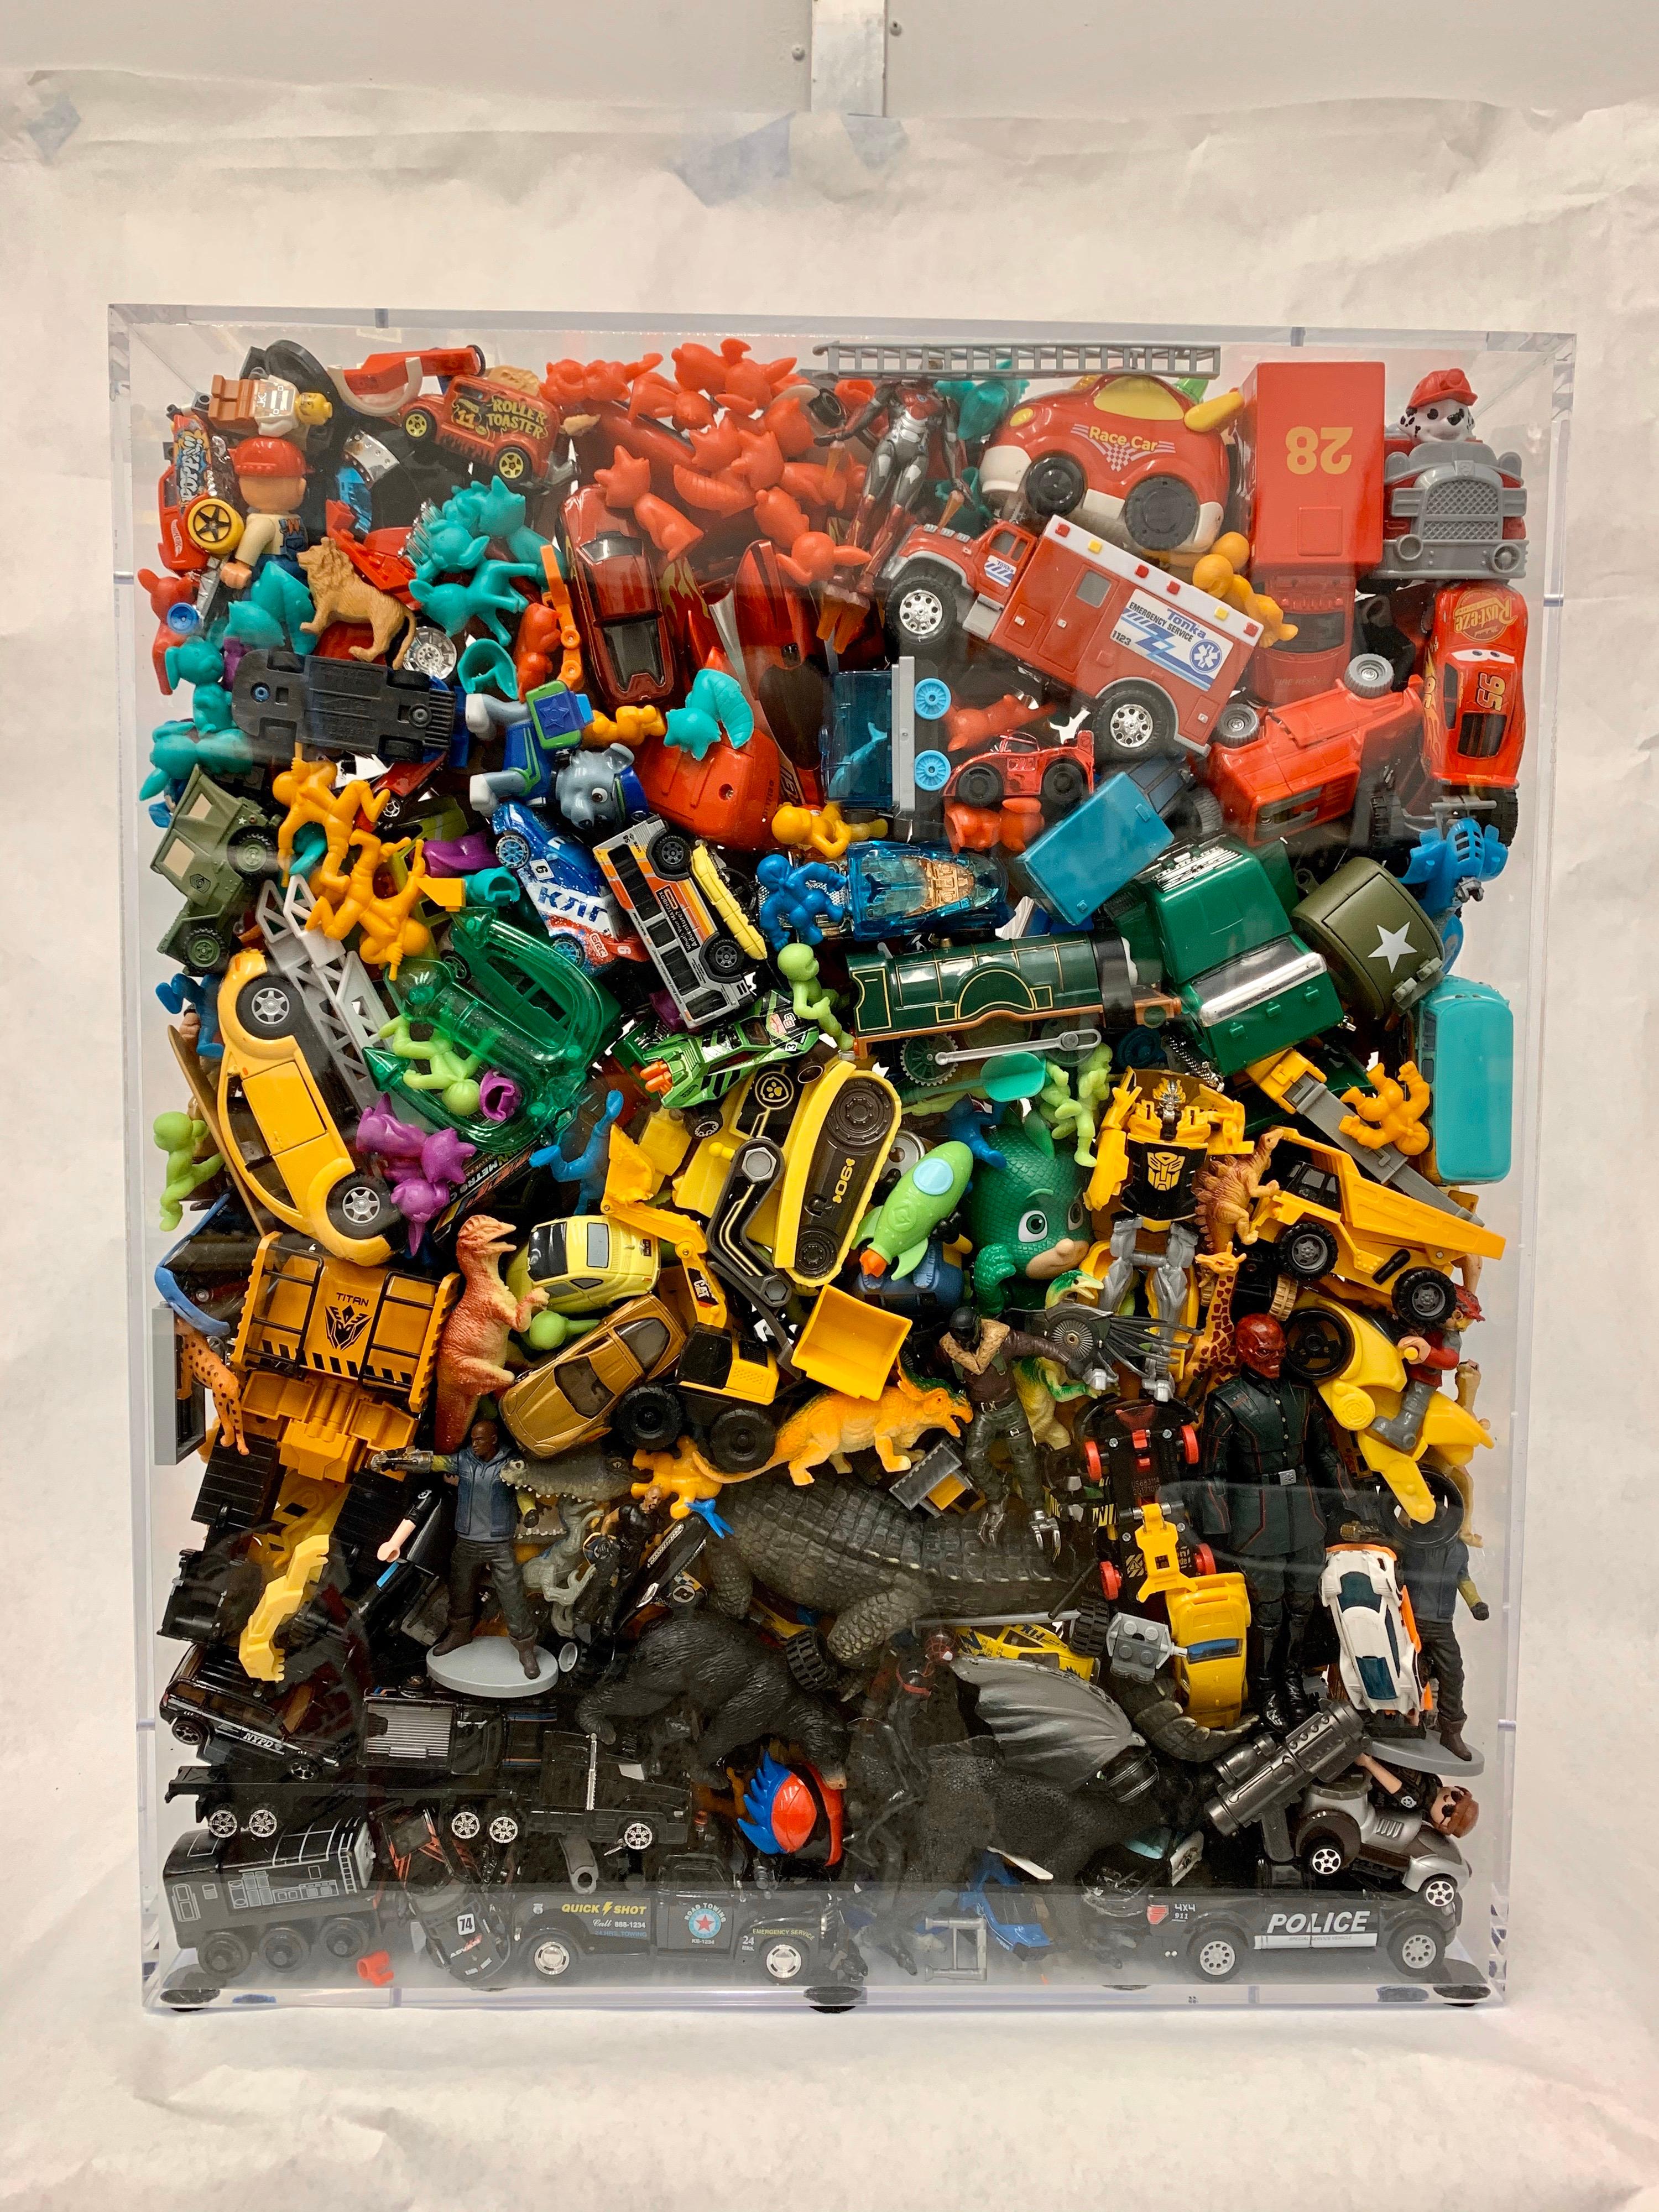 Phenomenal Collection of Toys Encased in a Lucite Box by J. Santamarina For Sale 7